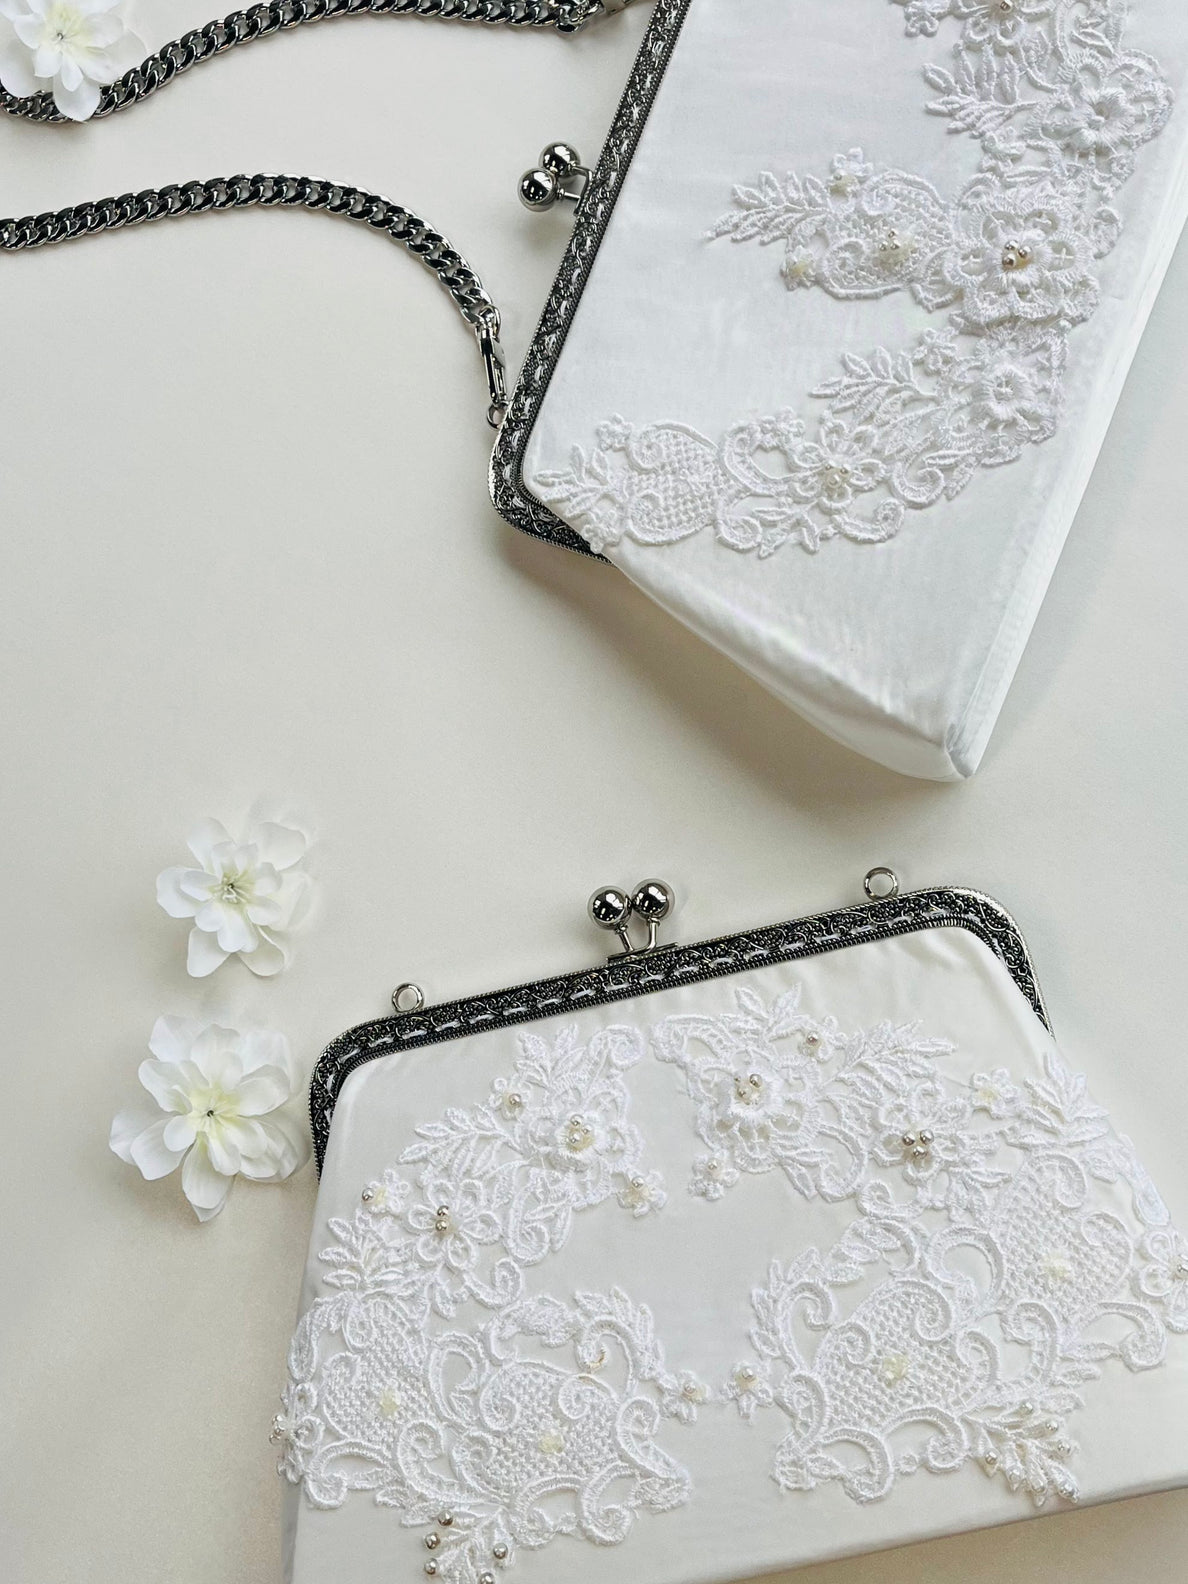 Date Night Clutch Made from Wedding Dress | Unbox The Dress